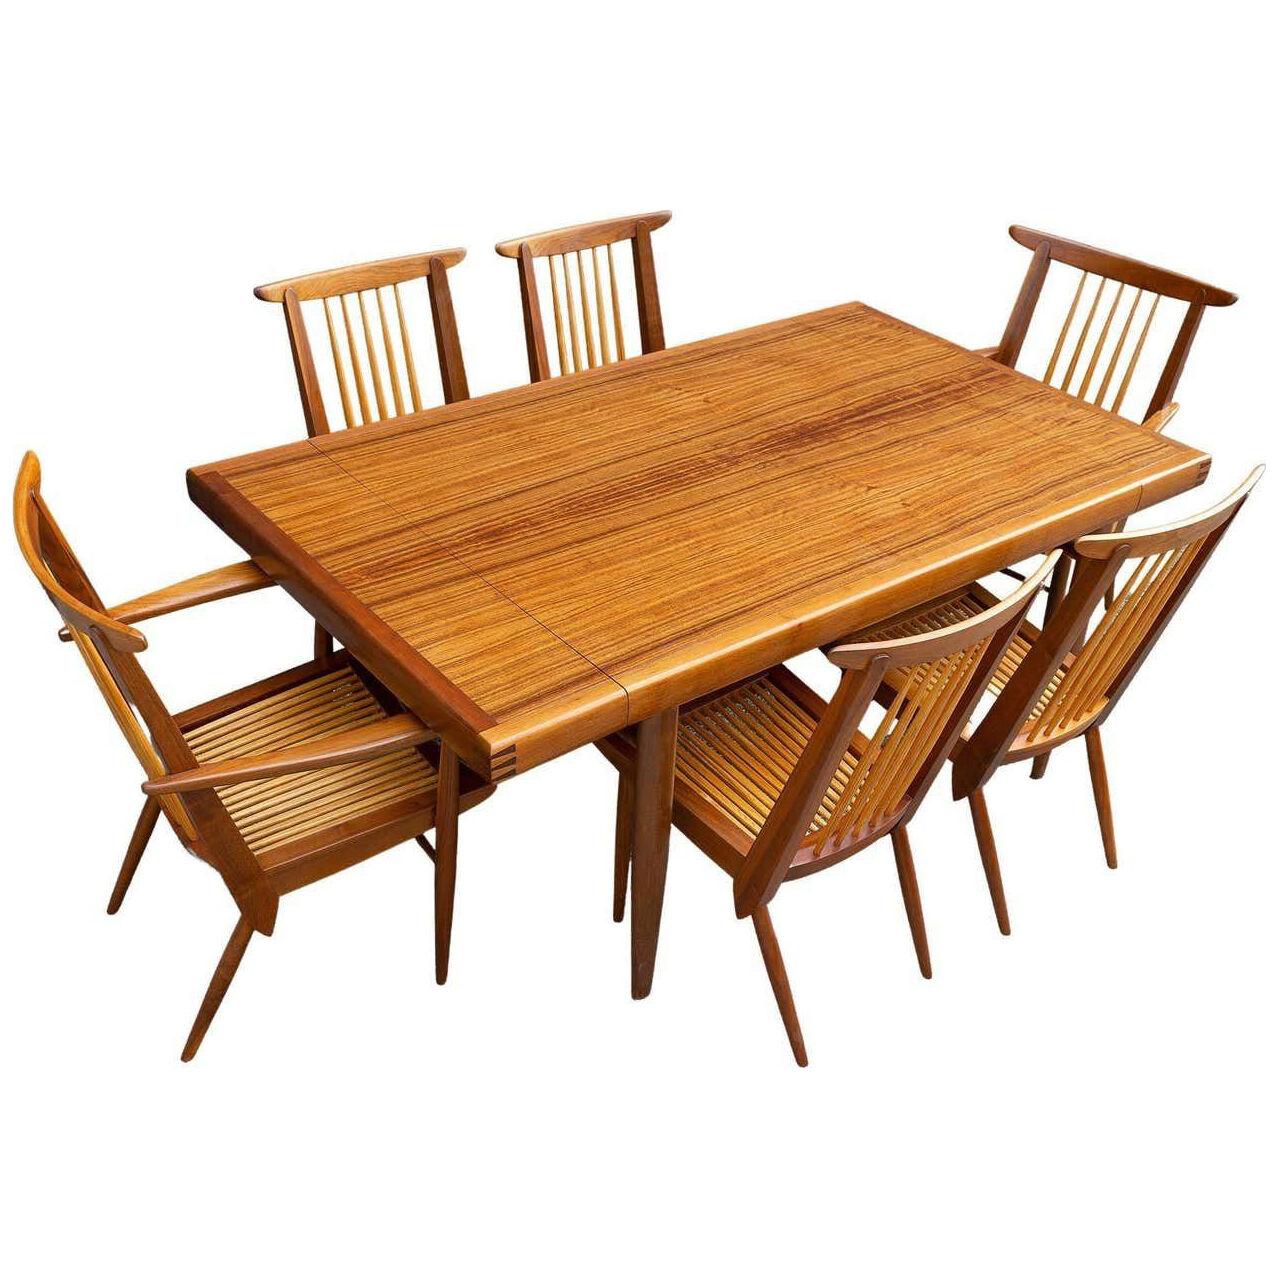 George Nakashima Dining Table & Chairs Widdicomb Origins Collection 1959